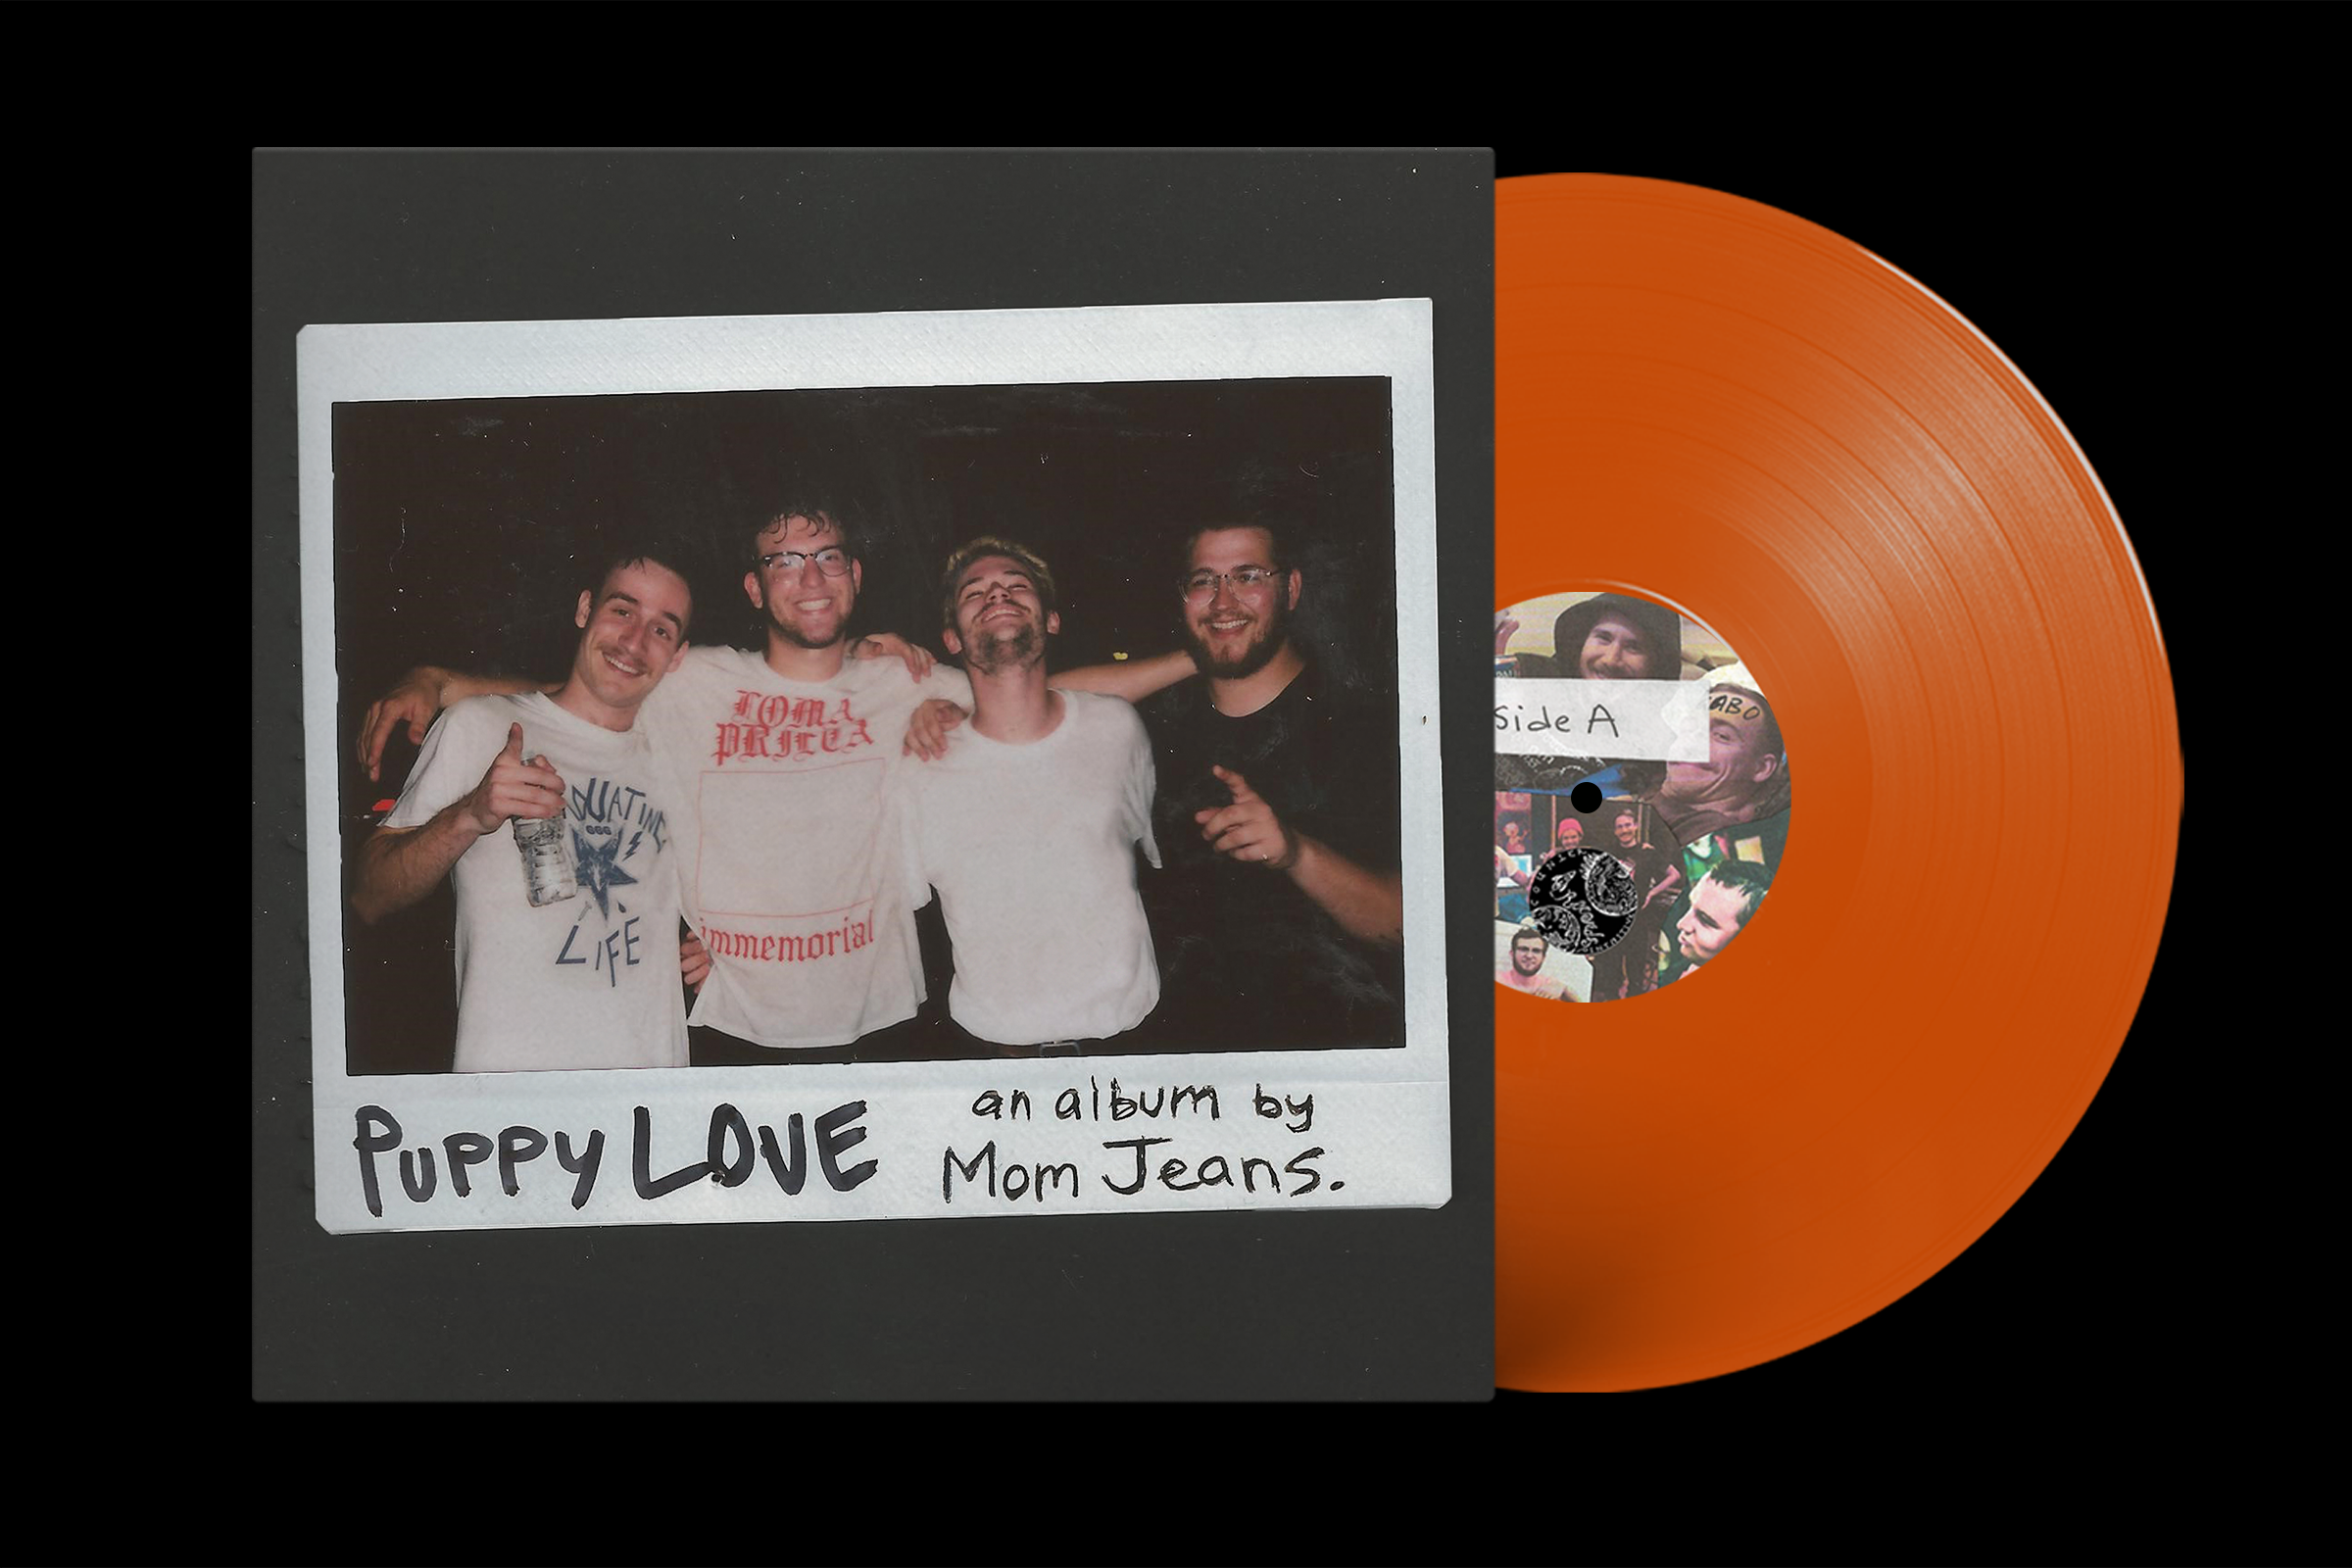 Mom Jeans - Puppy Love